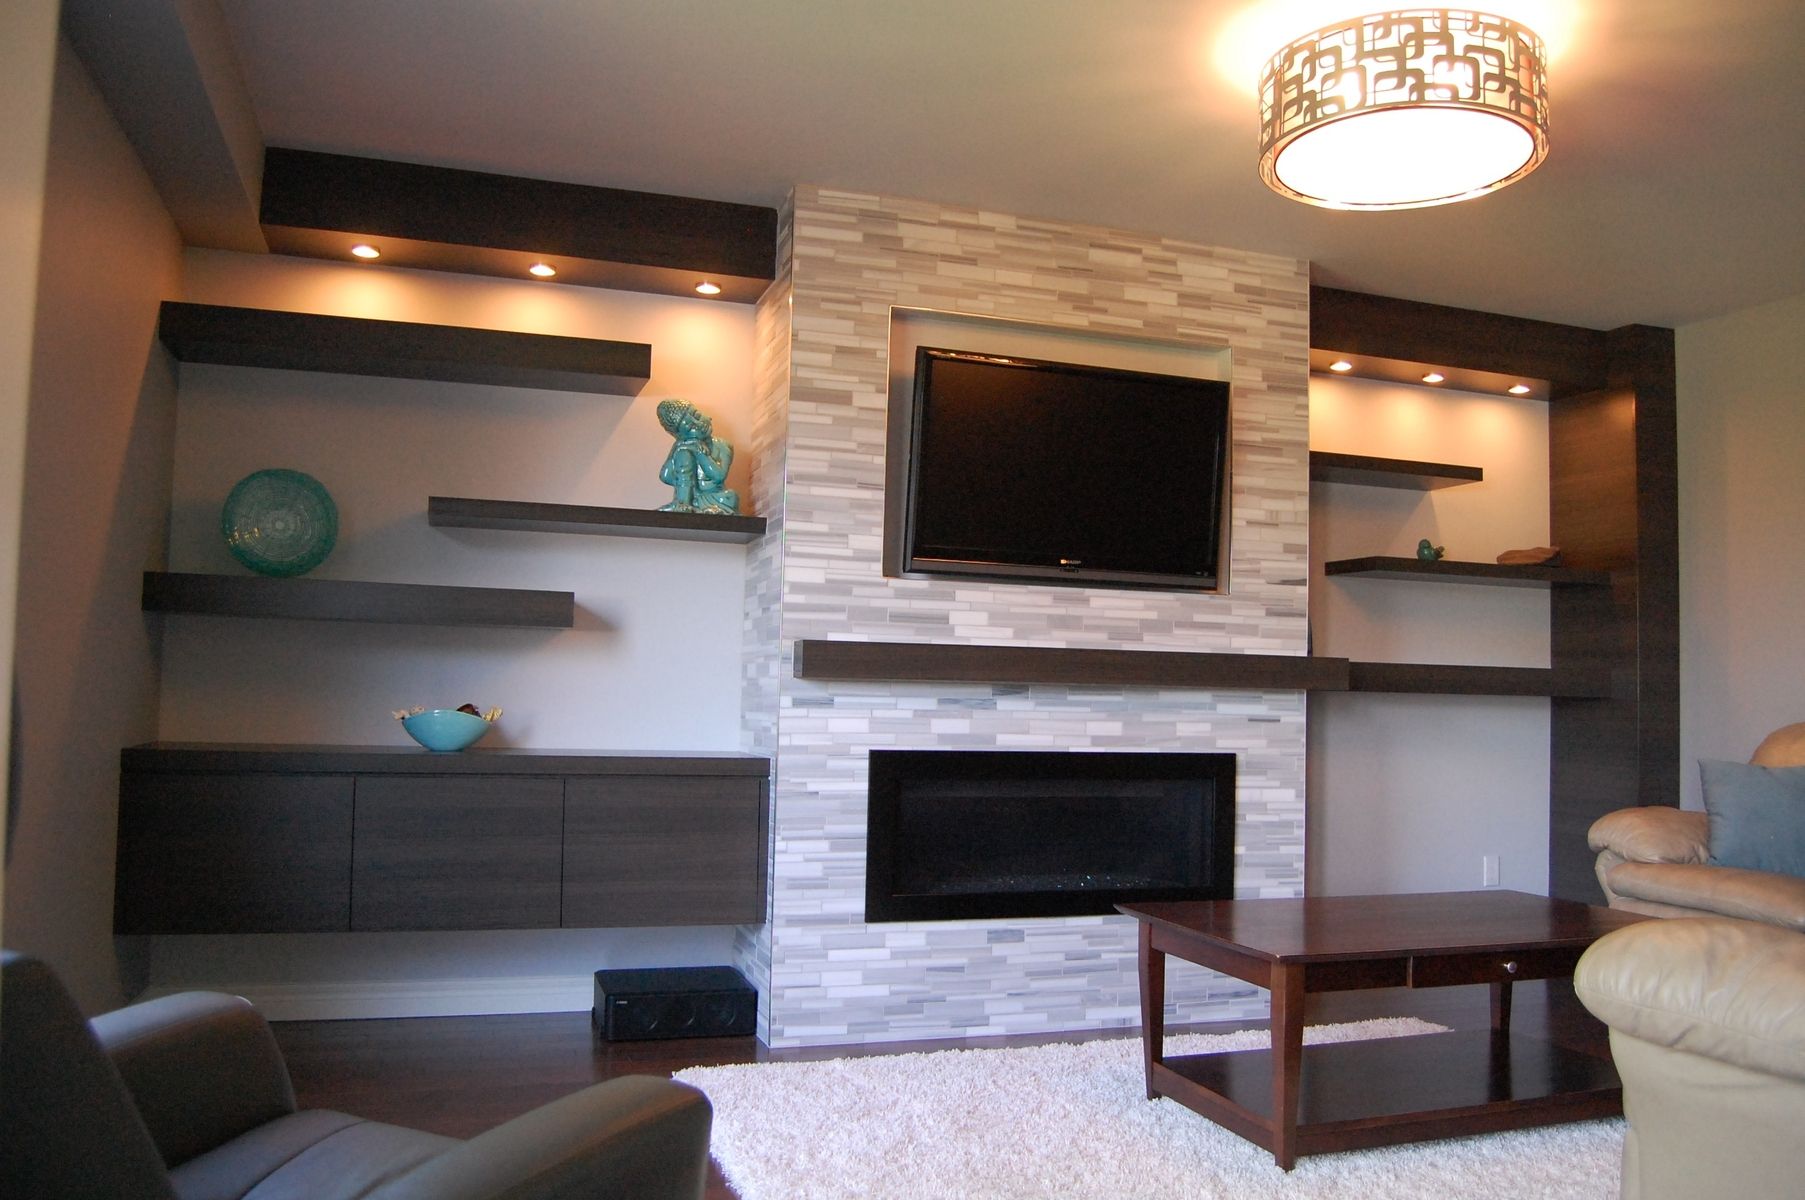 Solid Wood Entertainment Center with Fireplace Awesome Custom Modern Wall Unit Made Pletely From A Printed